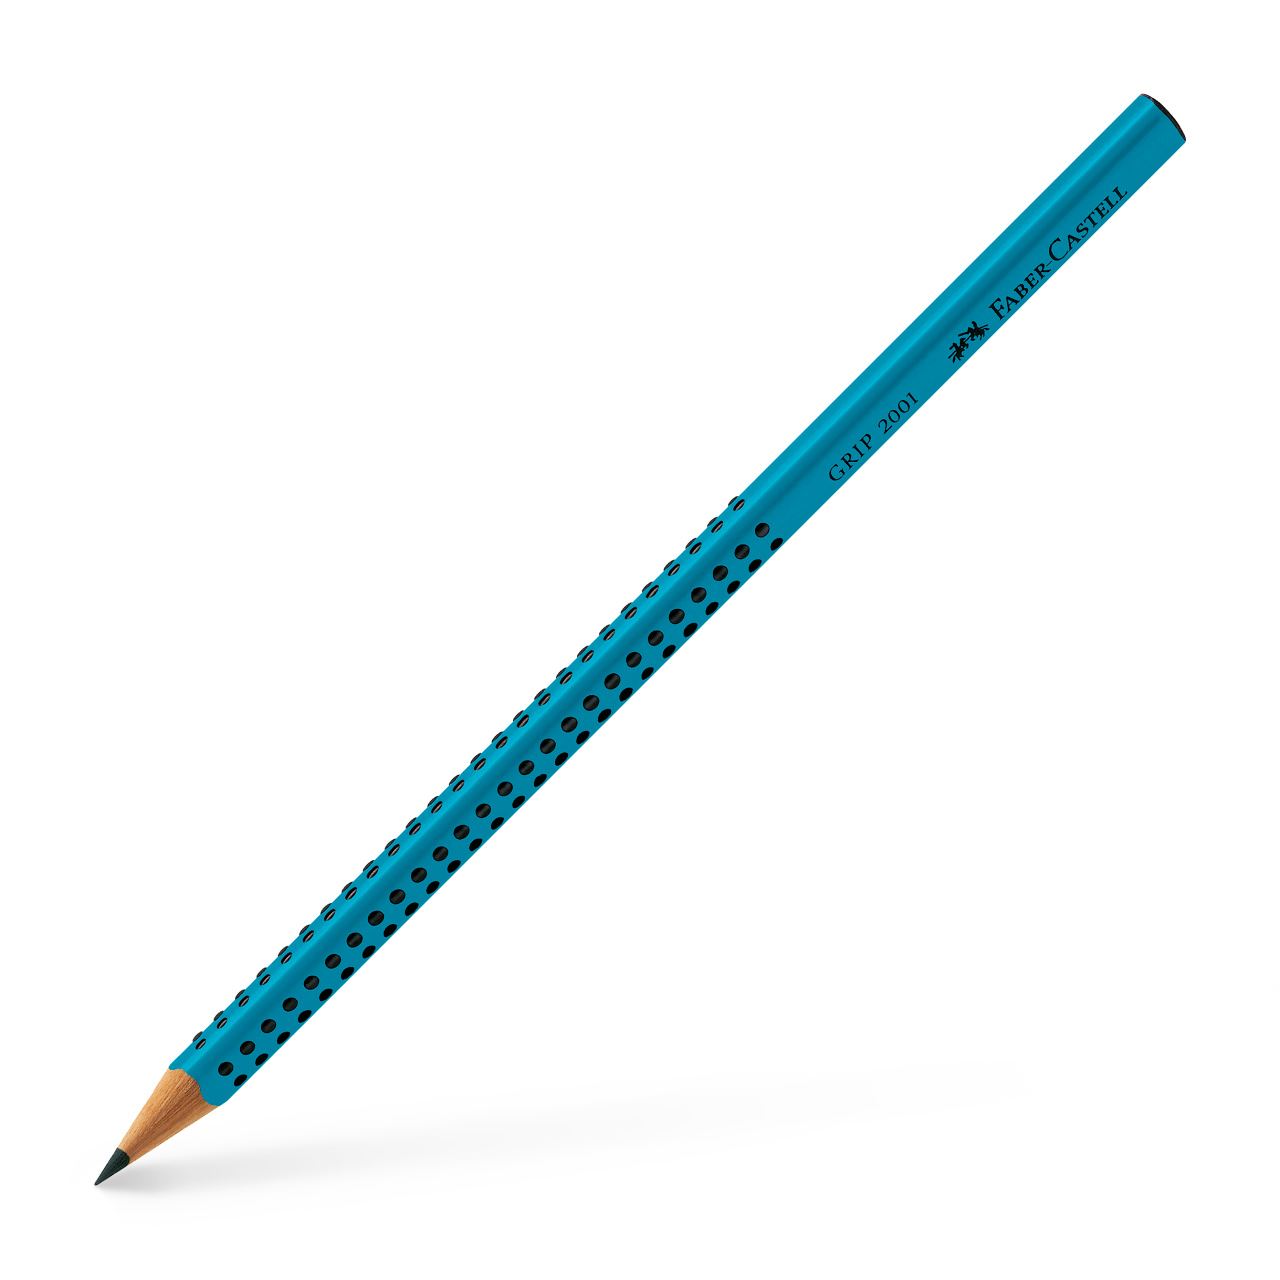 Faber-Castell - Grip 2001 graphite pencil, B, turquoise